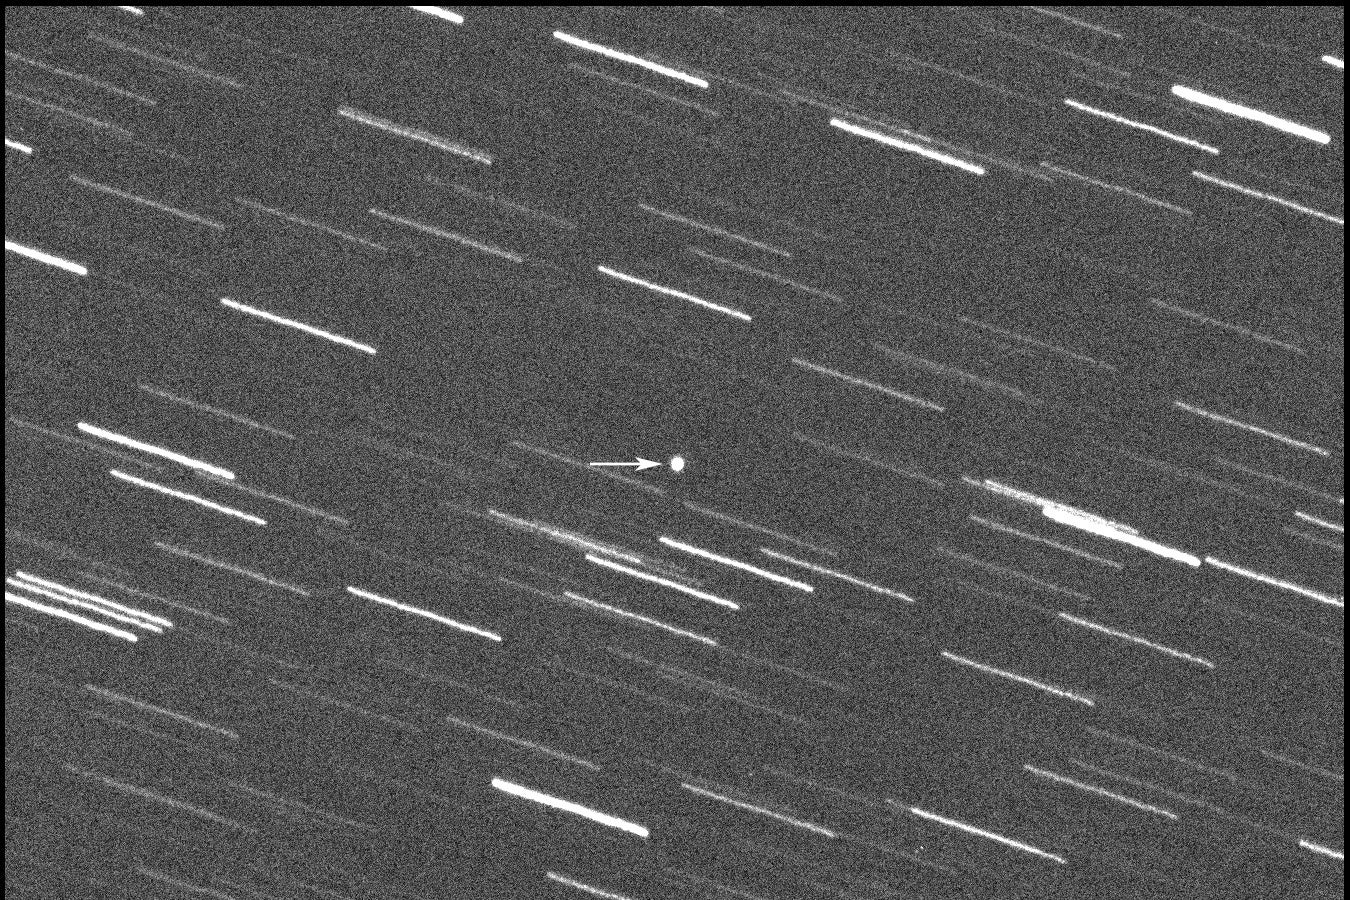 Asteroid Close Approach